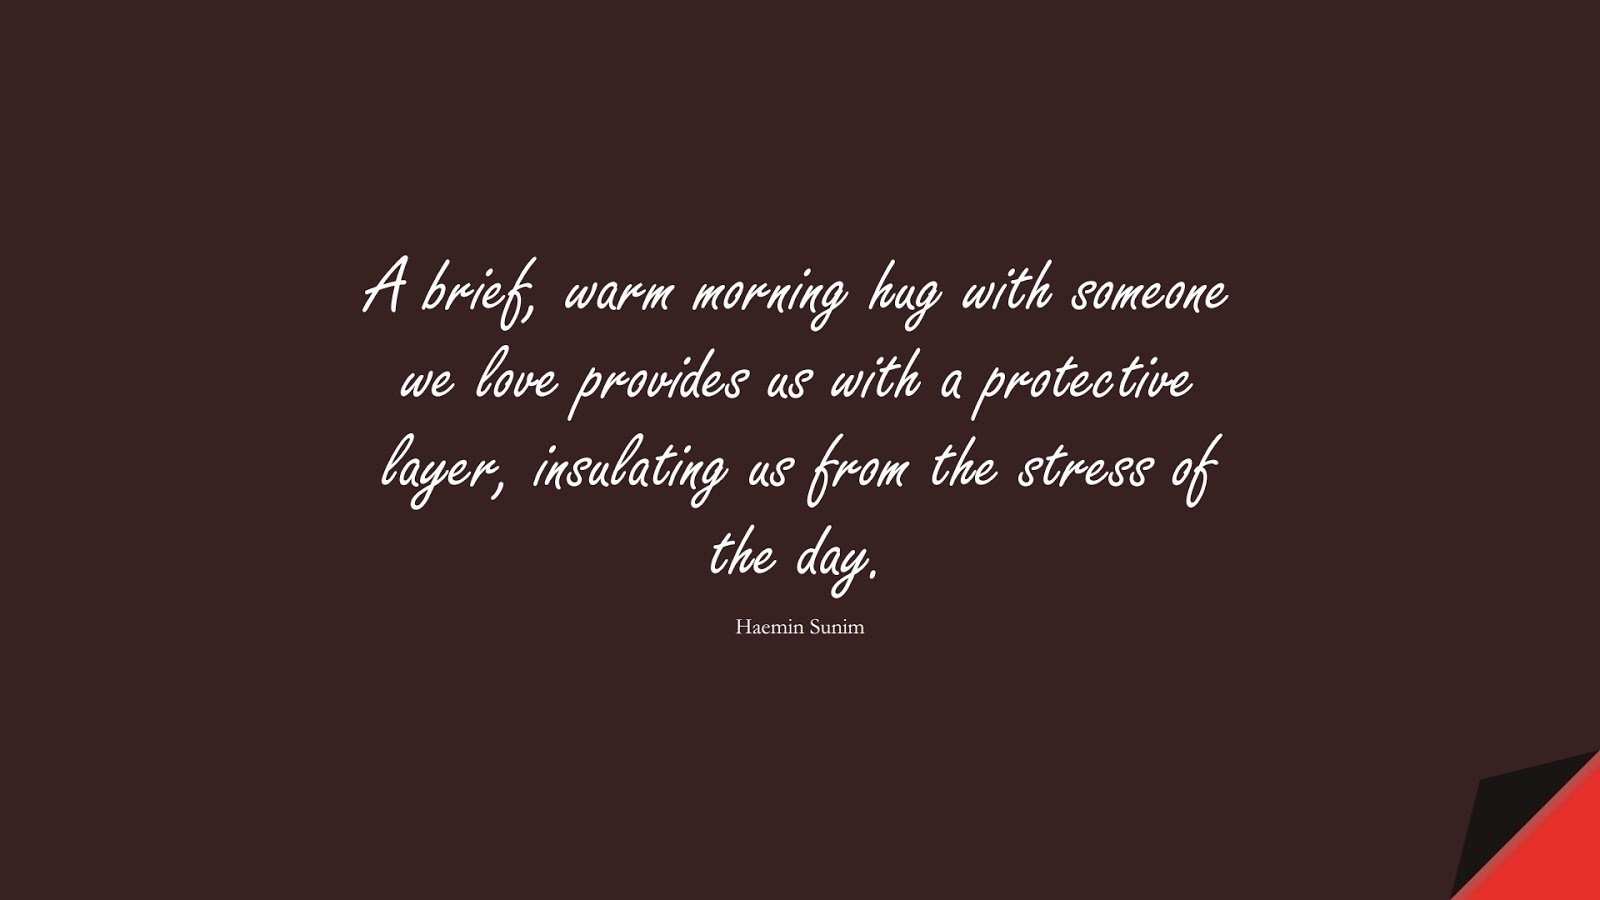 A brief, warm morning hug with someone we love provides us with a protective layer, insulating us from the stress of the day. (Haemin Sunim);  #StressQuotes